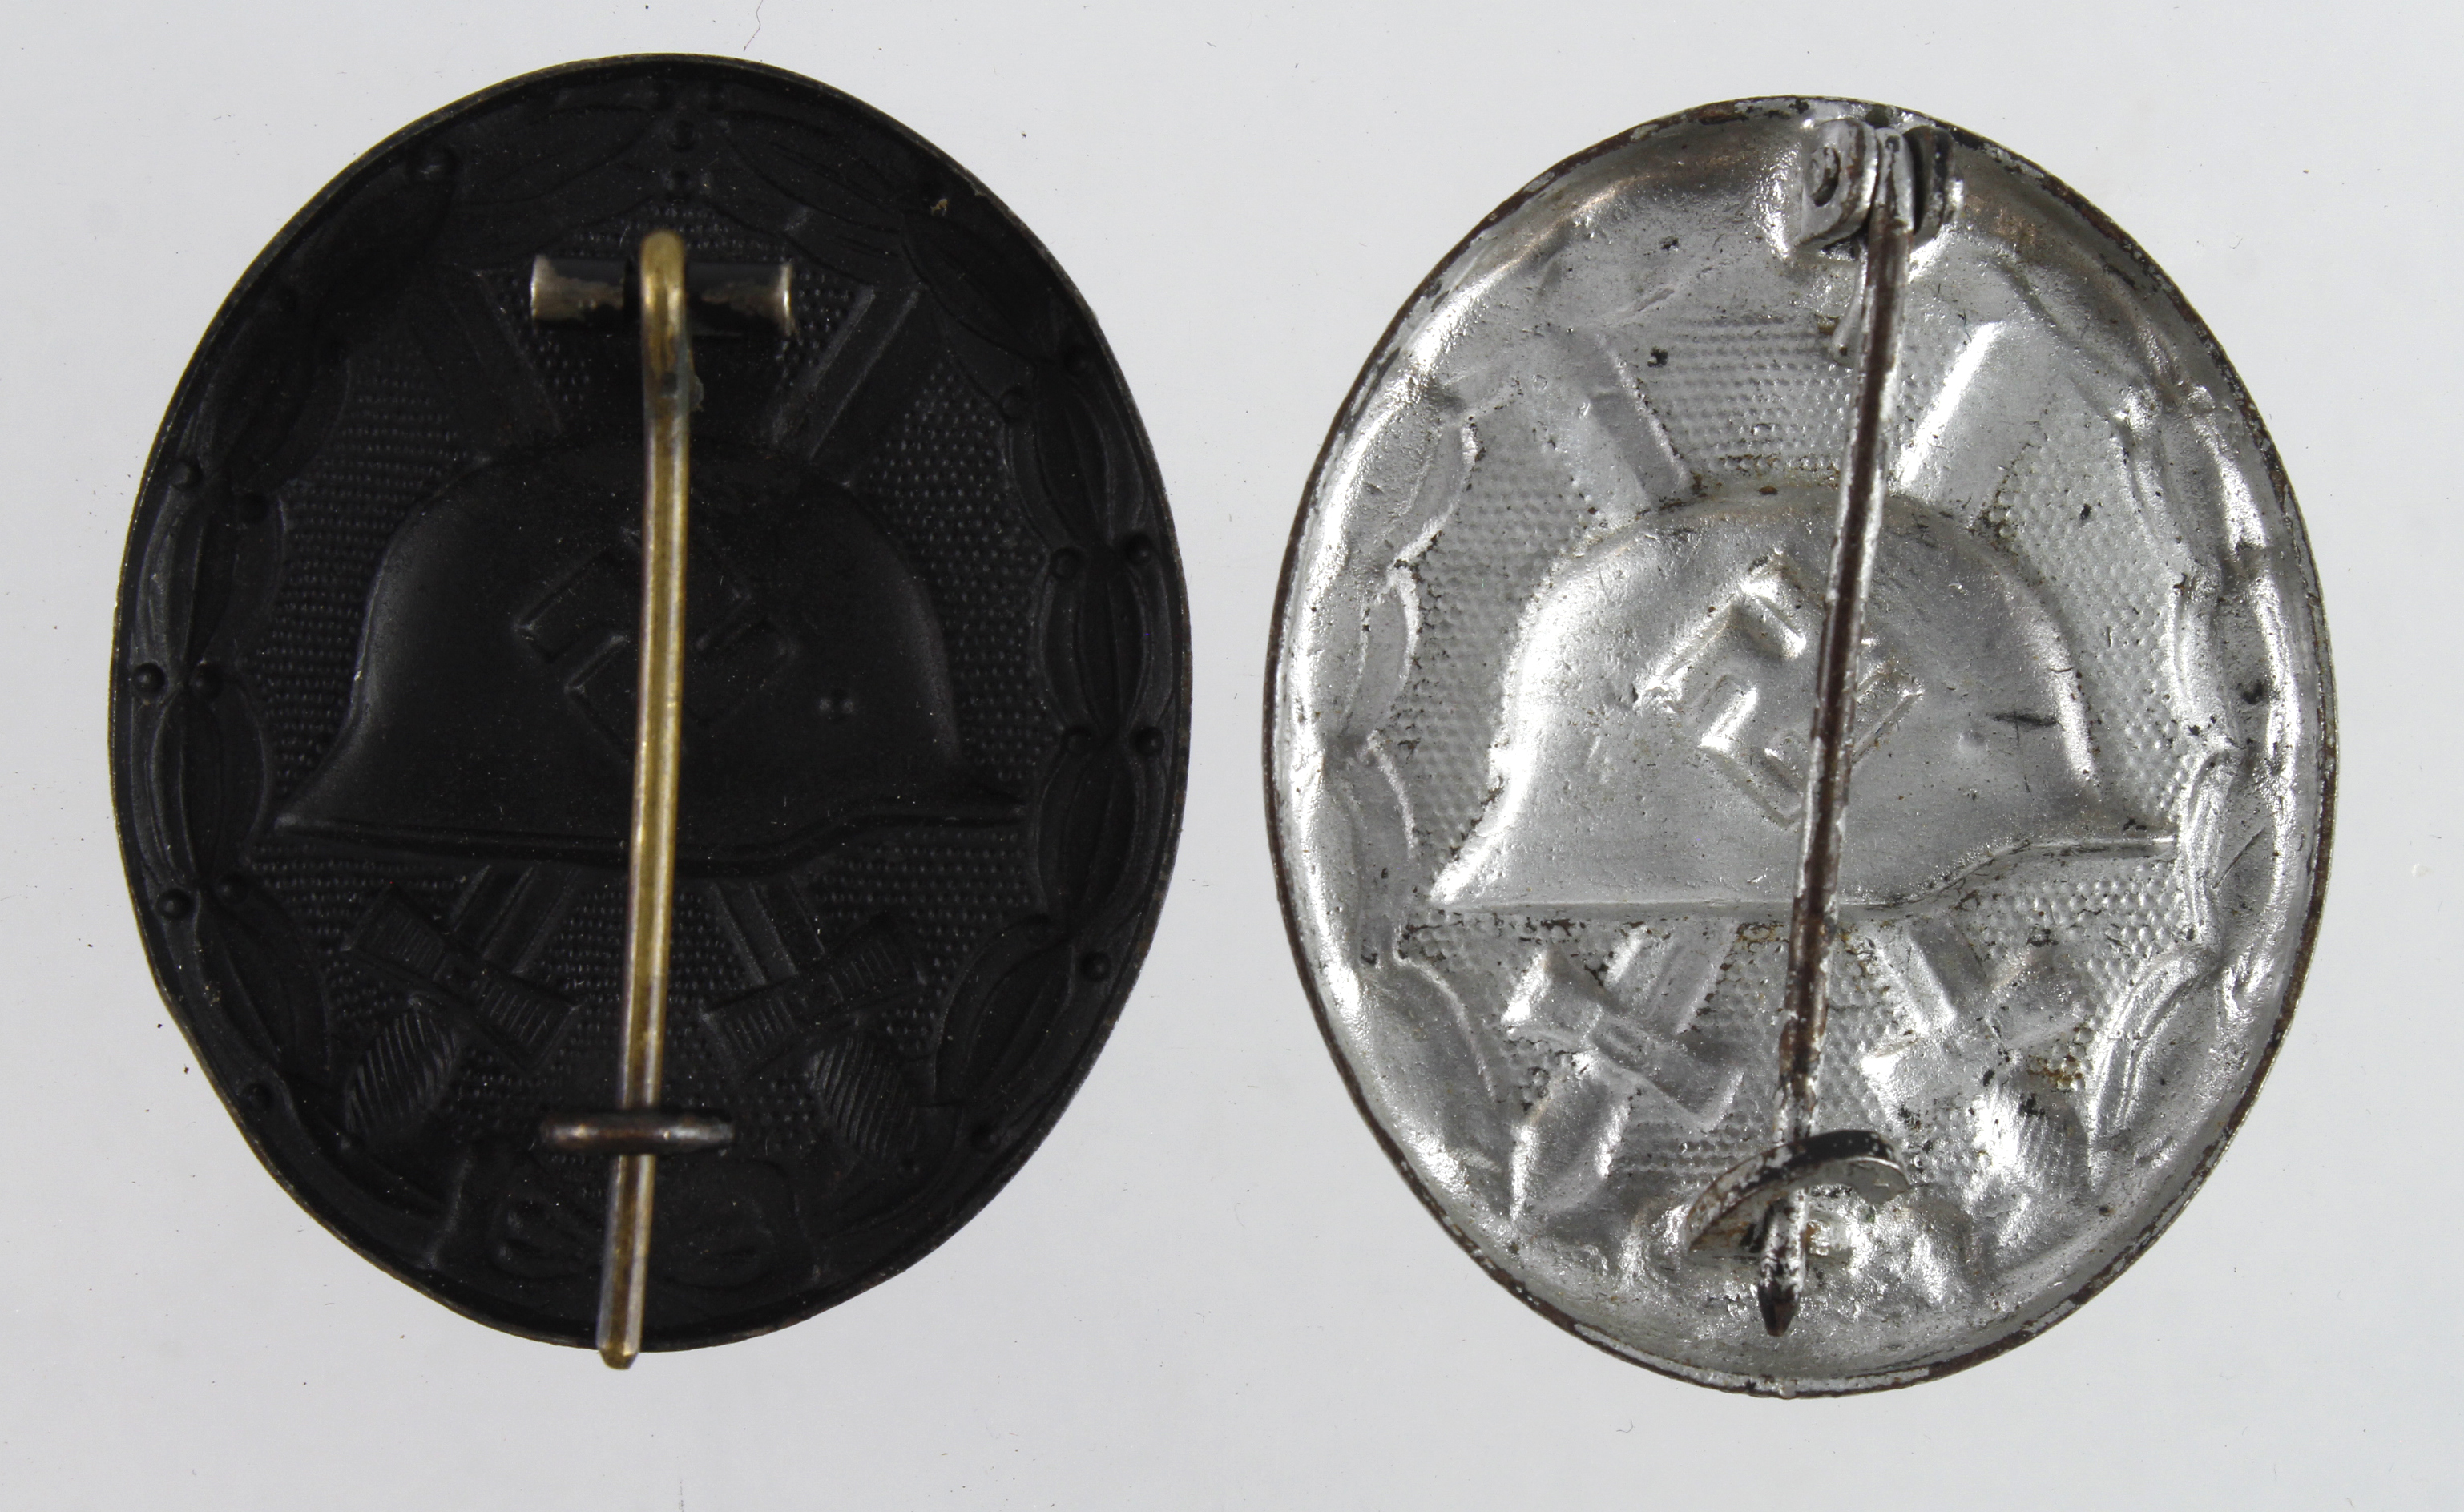 Germany from a one owner collection, two wounds badges, black and silver, lightweight. - Image 2 of 2